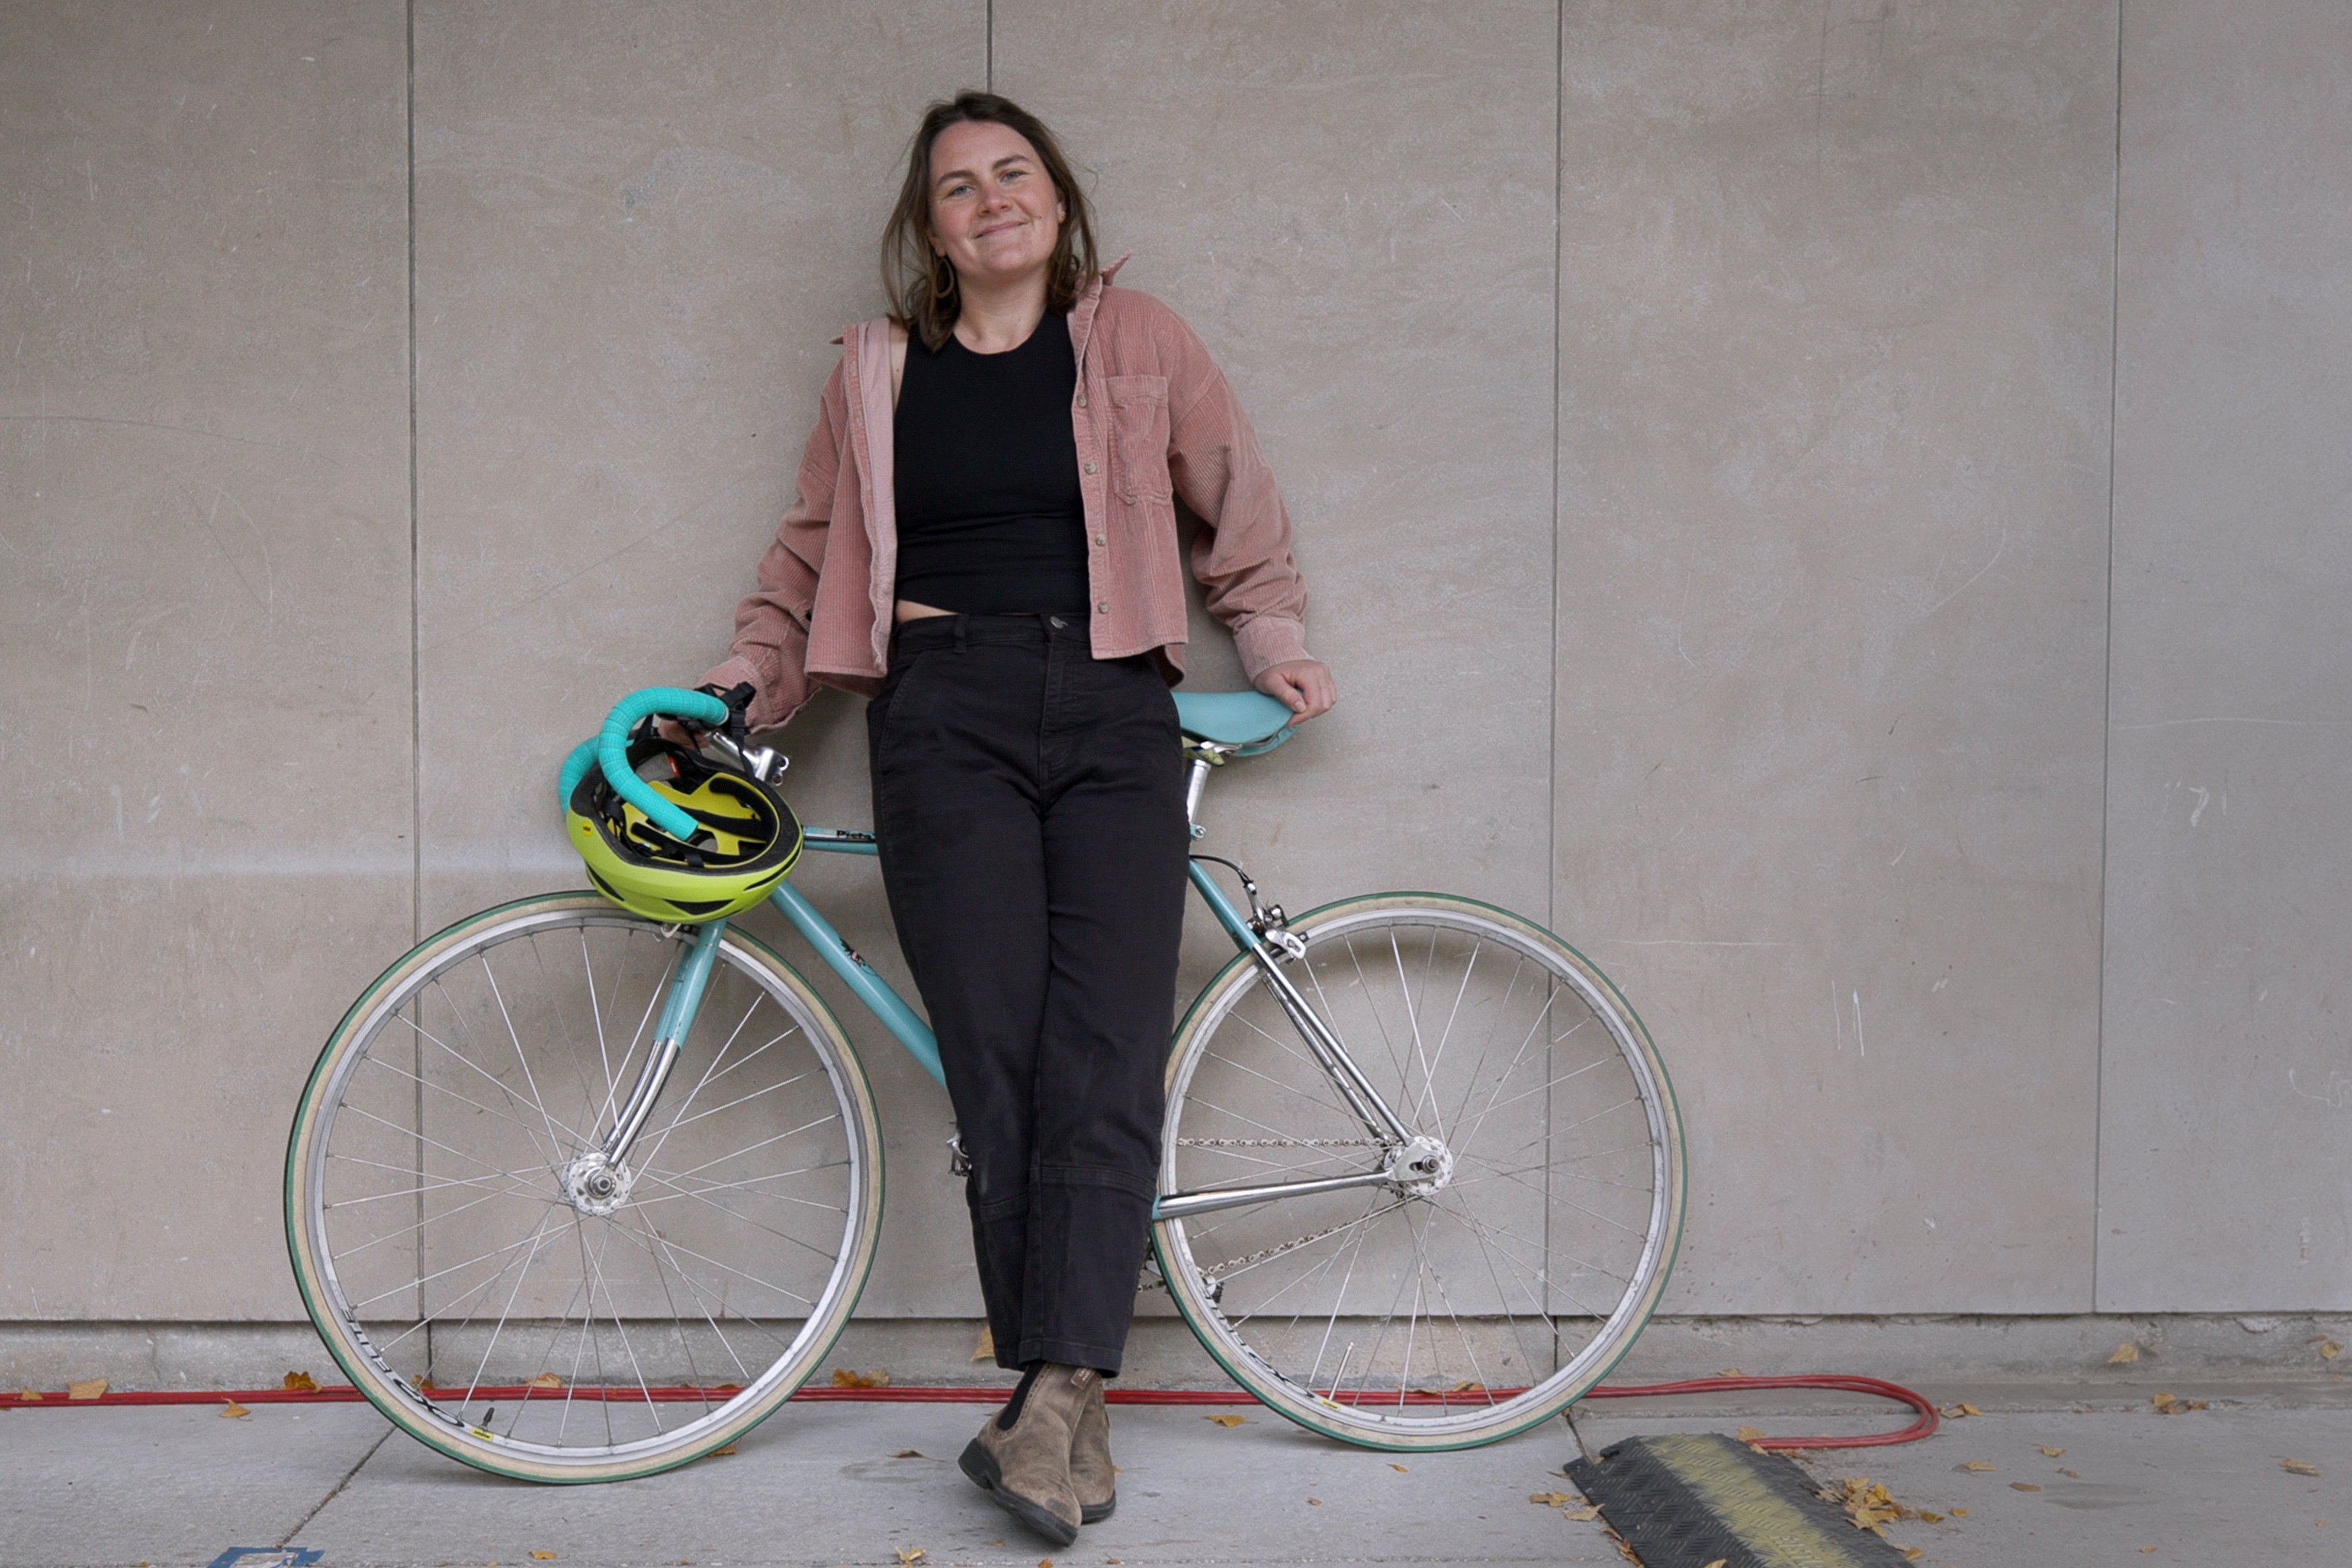 Graduate student Bianca Champenois SM ’22 started the MIT Bike Lab to inform and serve the MIT community.